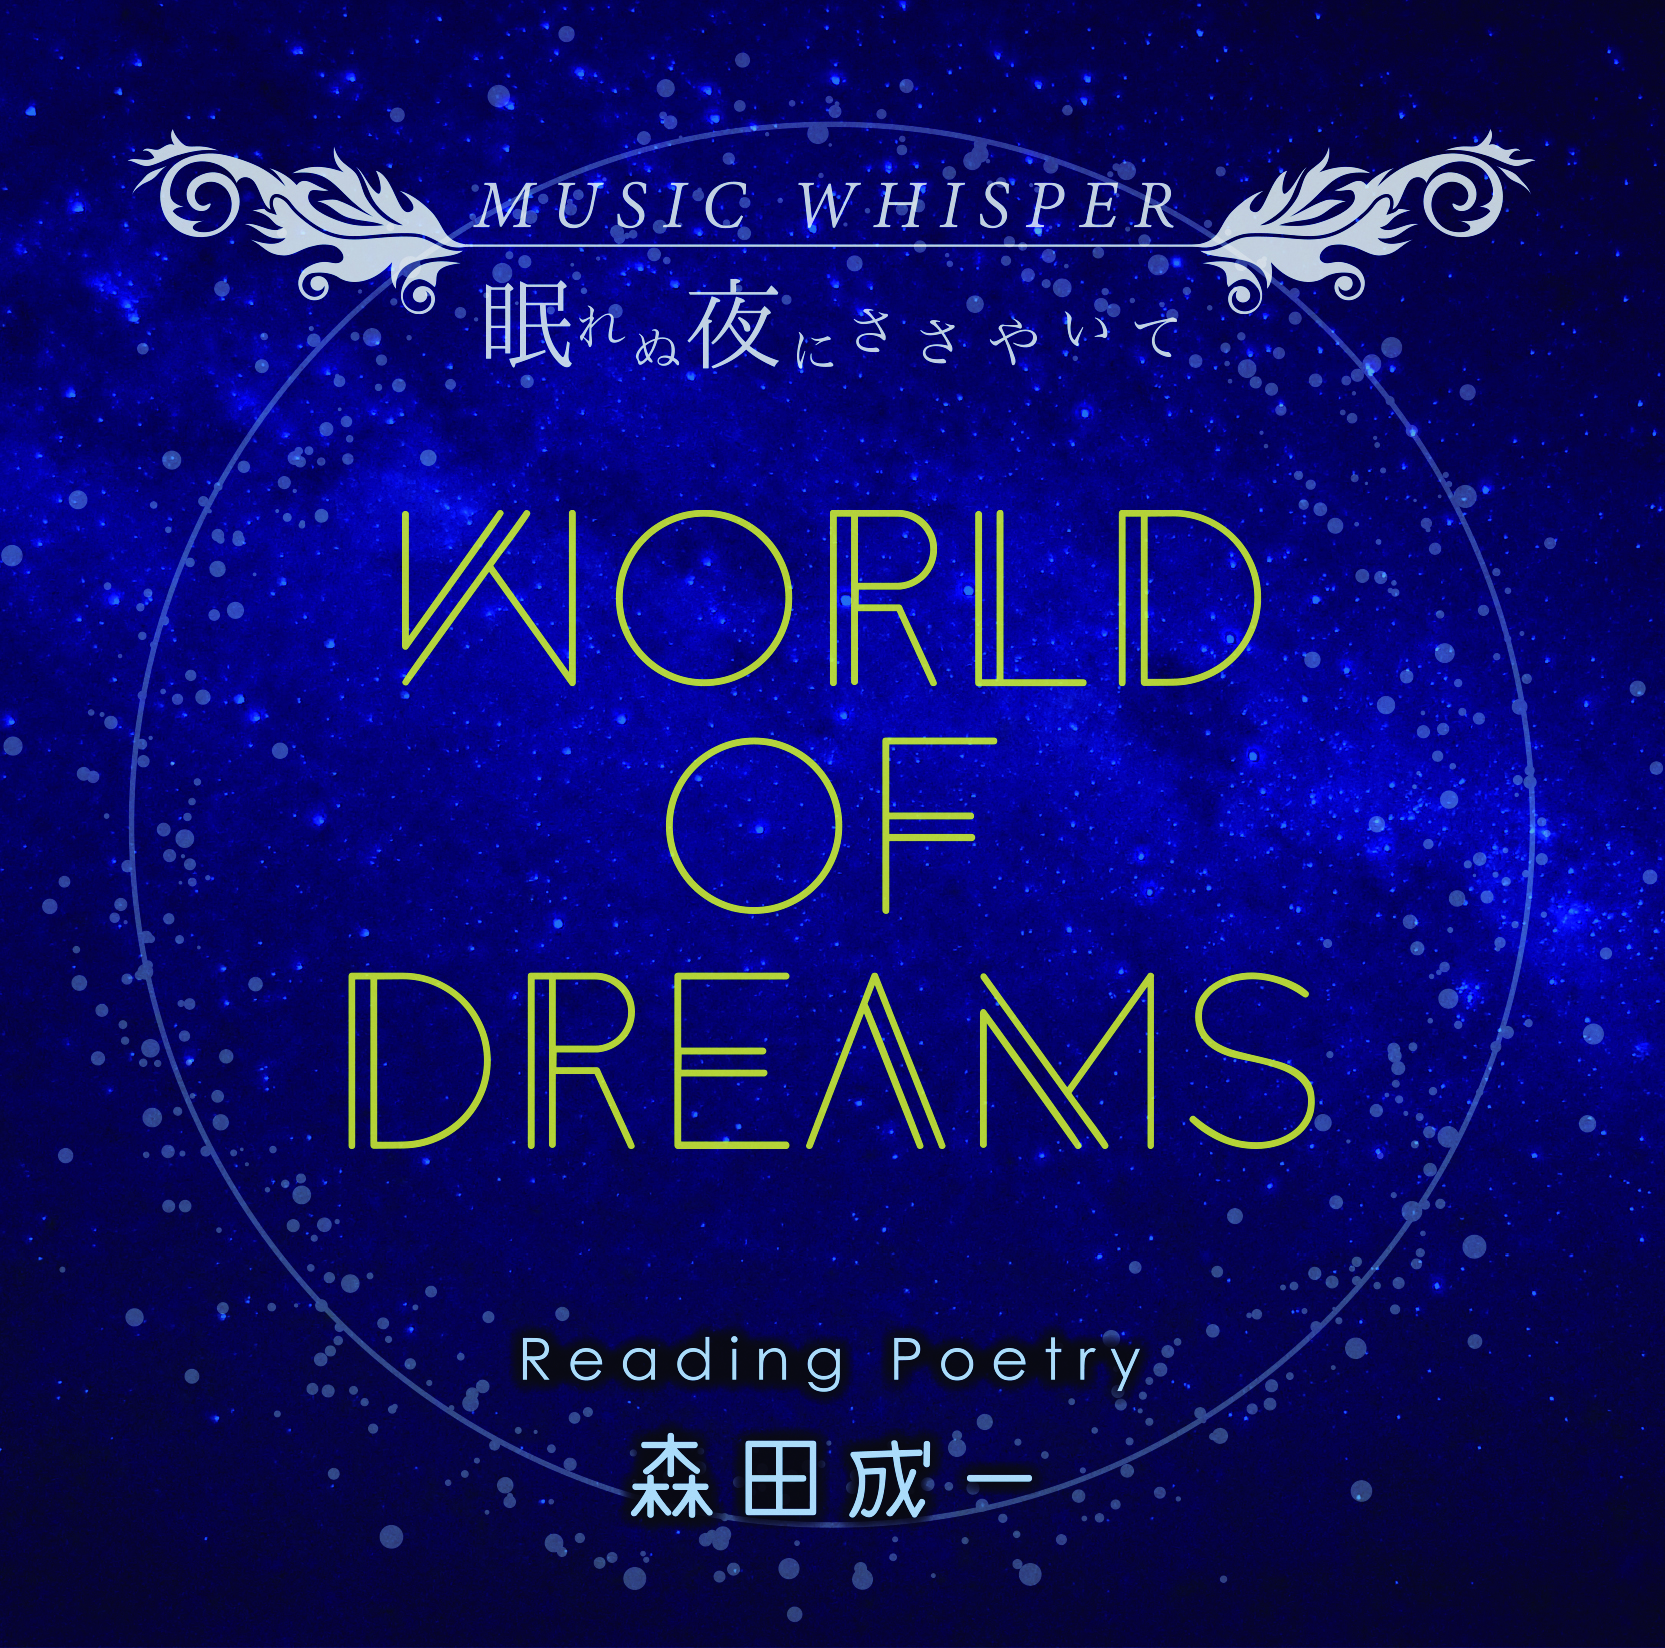 【World Of Dreams】Reading Poetry 森田成一